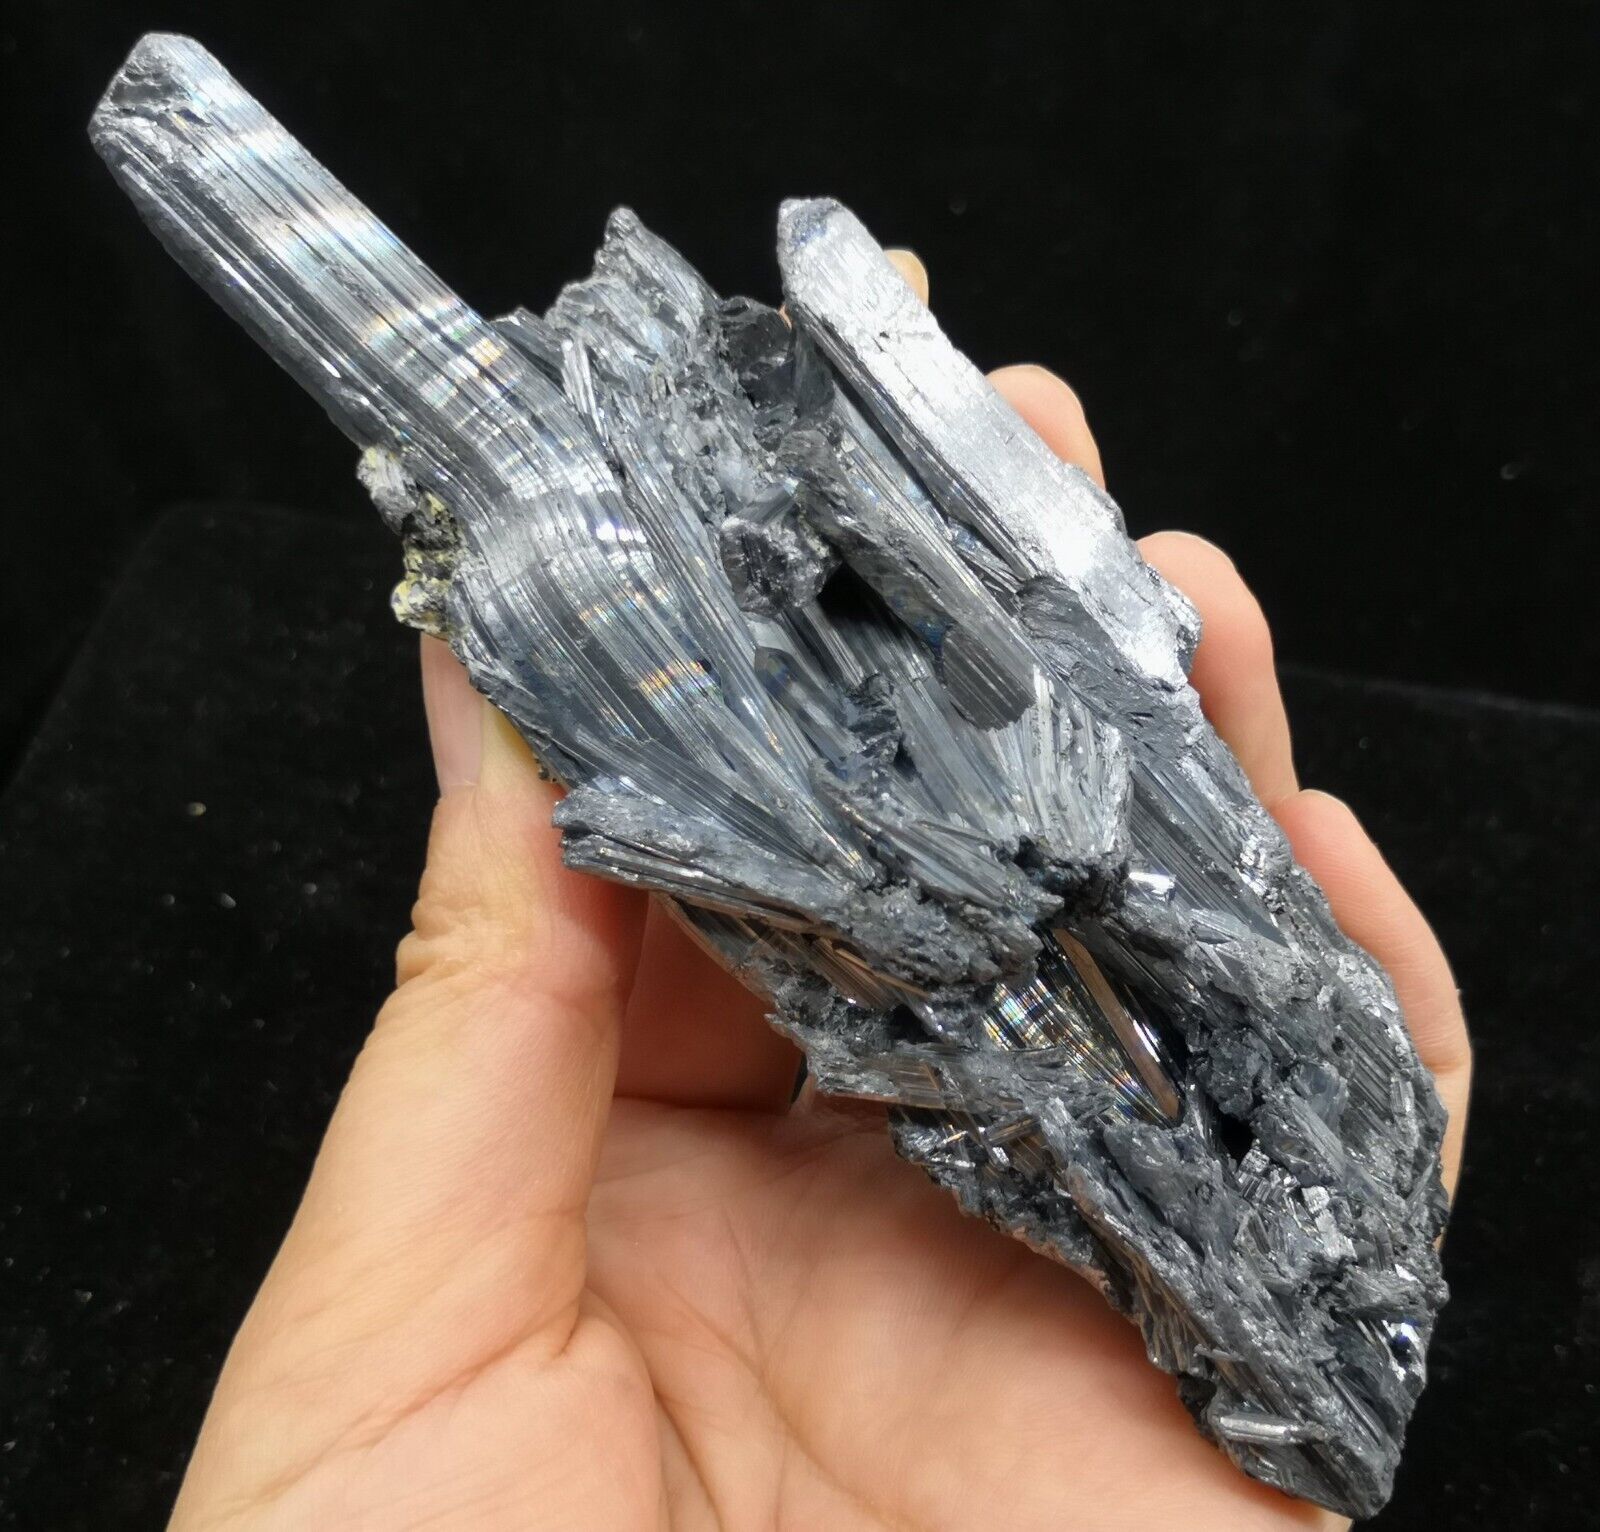 137mm 237g POWERFUL Stibnite cluster with NATURAL BENT CRYSTAL, showy all around